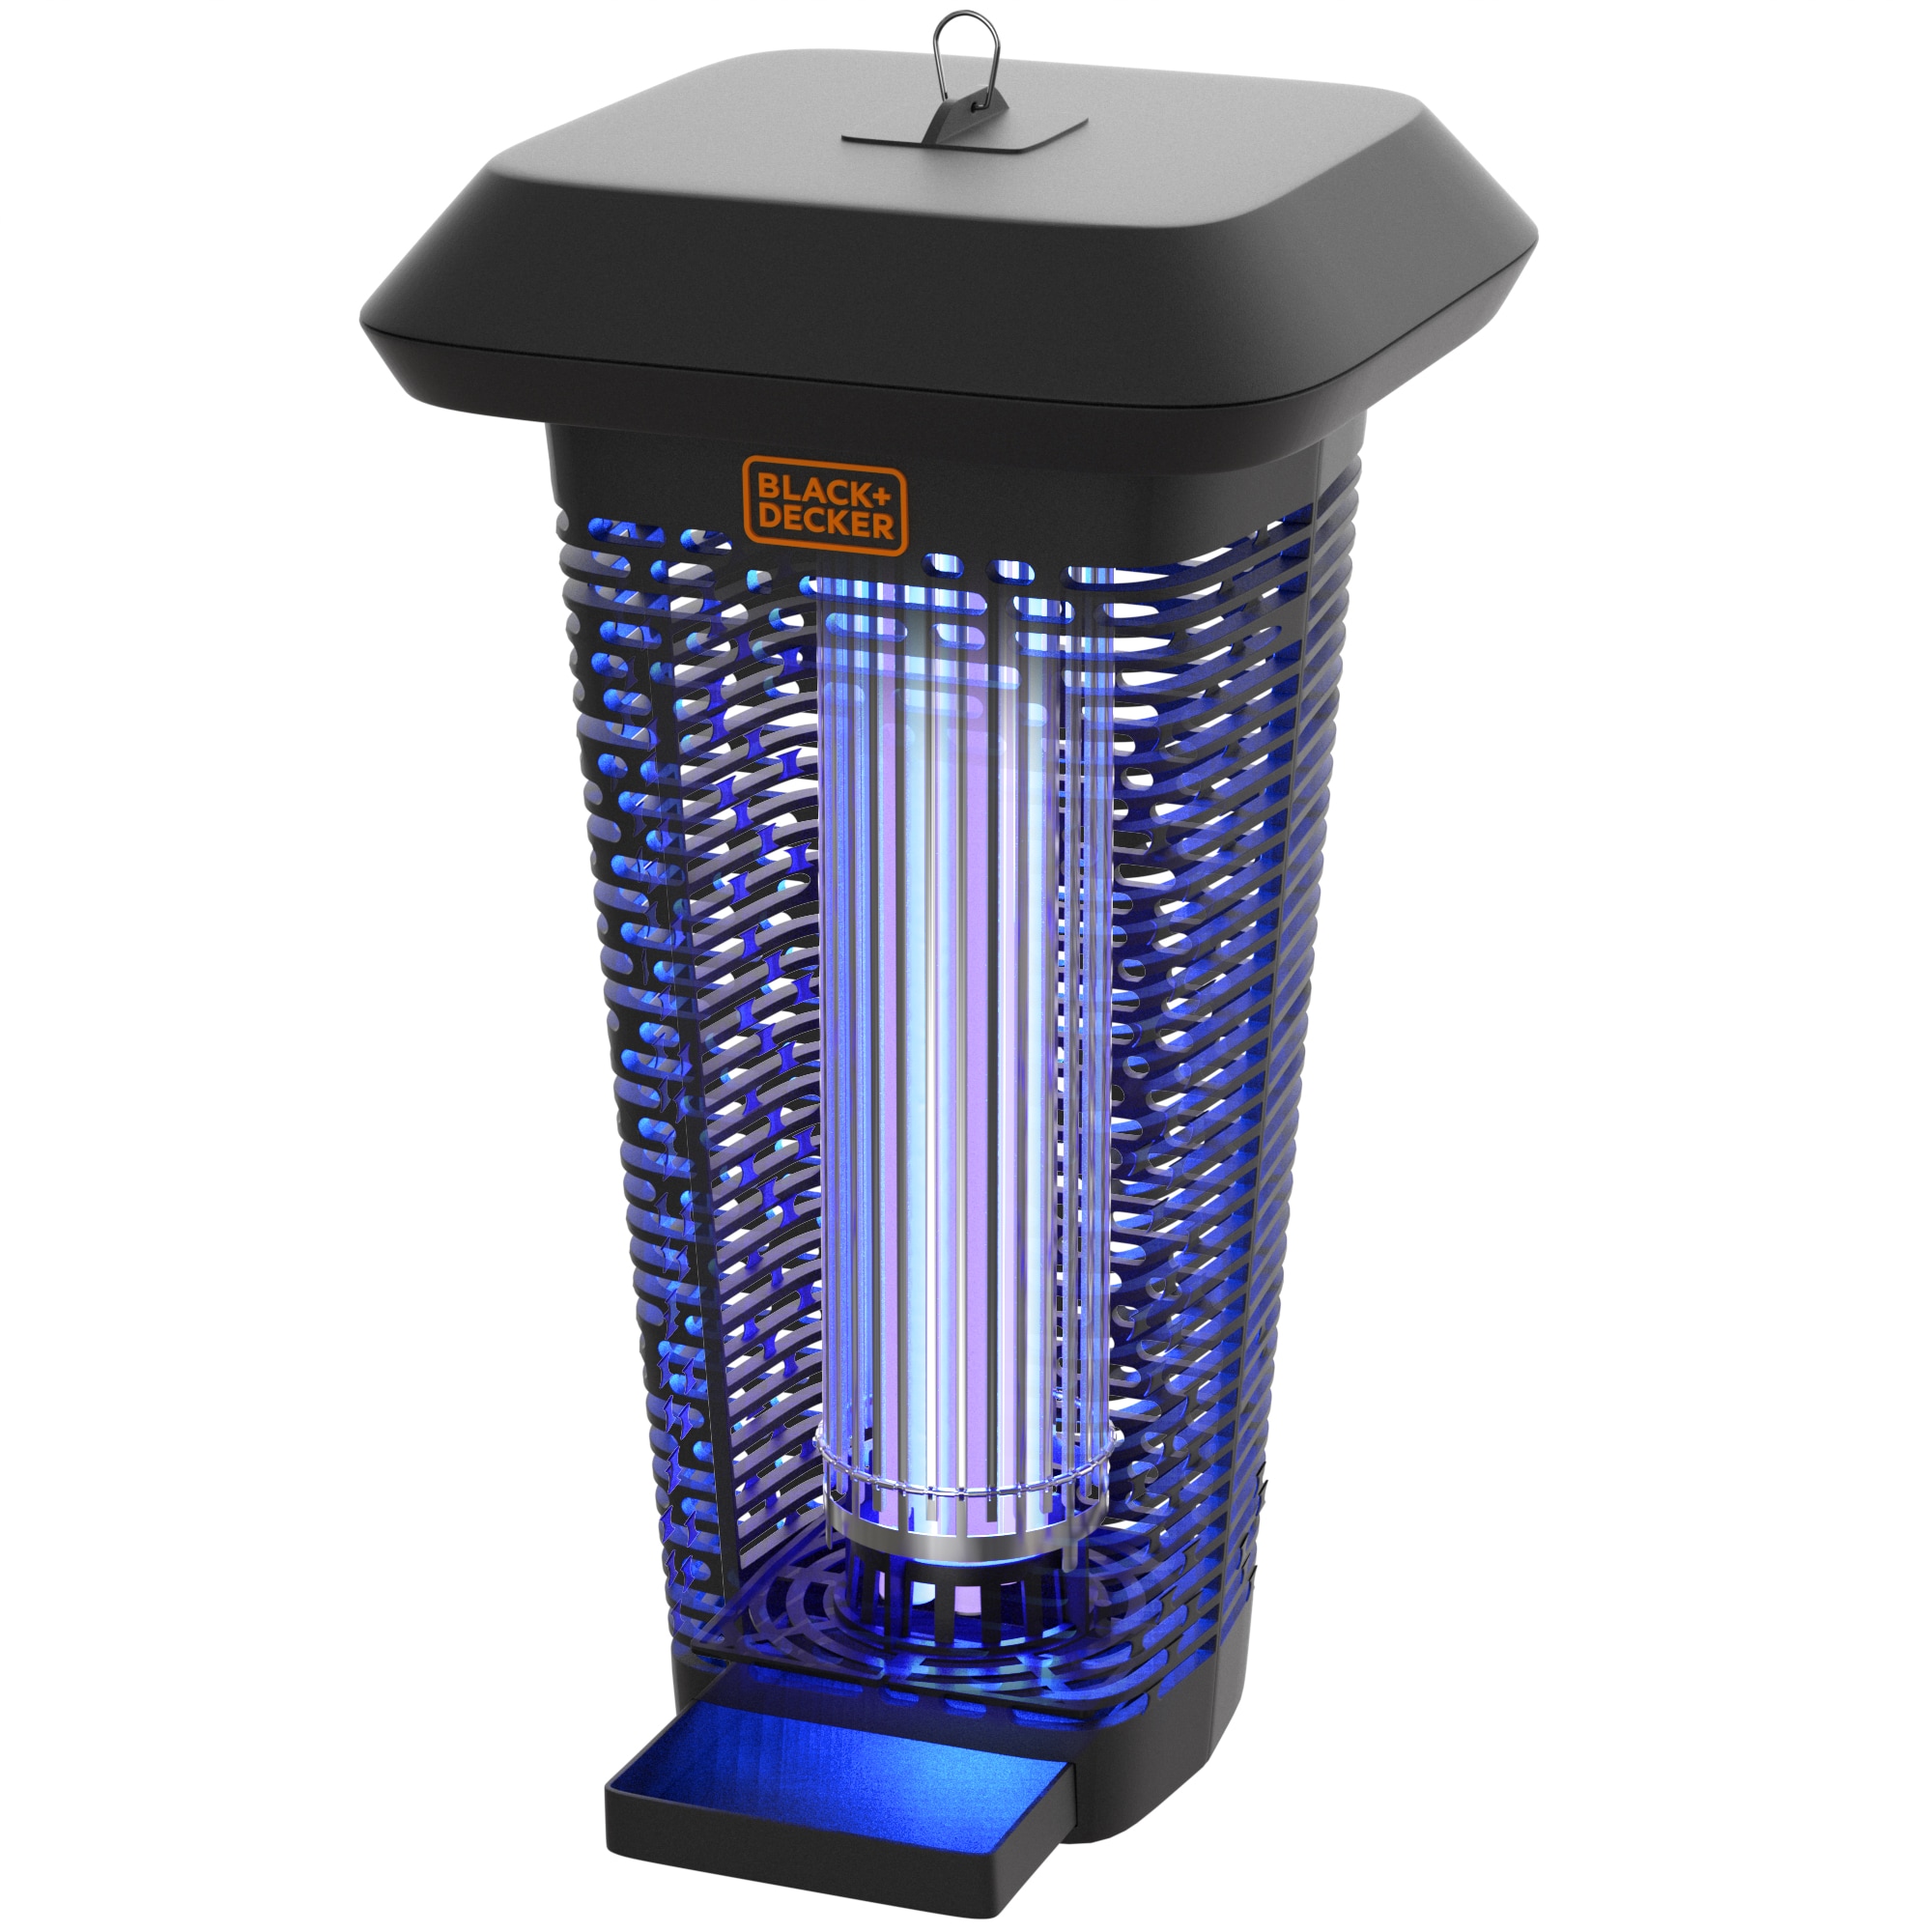 MaxKare Fly Bug Zapper Electric Mosquito Killer Lamp with UV Light